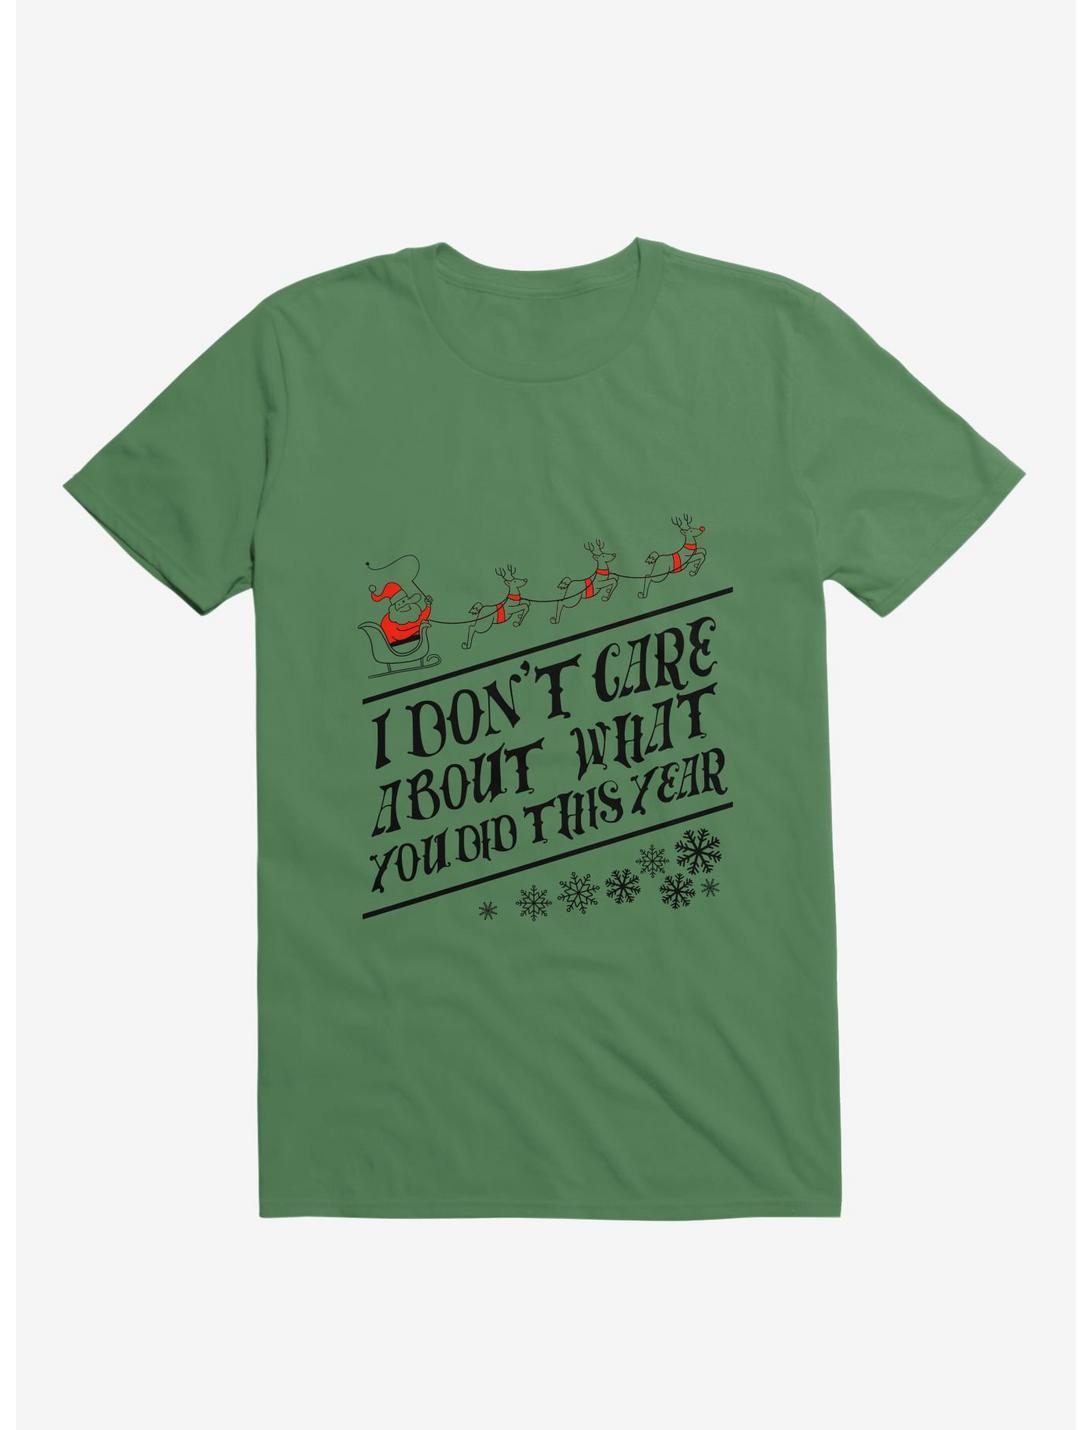 I Don't Care About What You Did This Year Santa Kelly Green T-Shirt, KELLY GREEN, hi-res